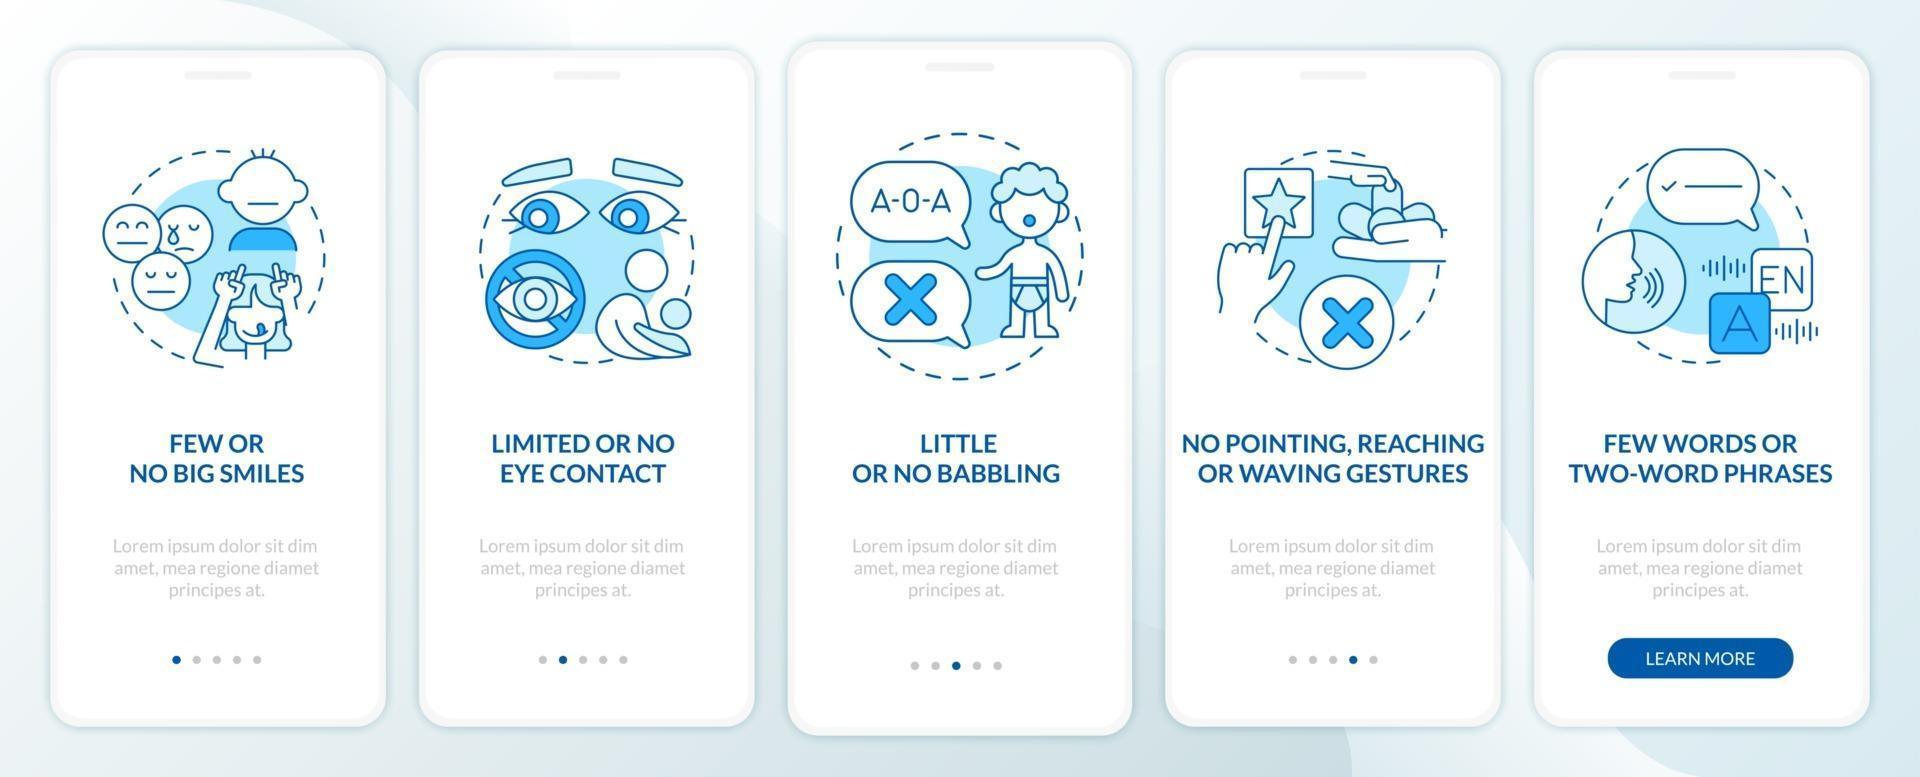 ASD signs in children onboarding mobile app page screen. Few smiles, no gestures walkthrough 5 steps graphic instructions with concepts. UI, UX, GUI vector template with linear color illustrations